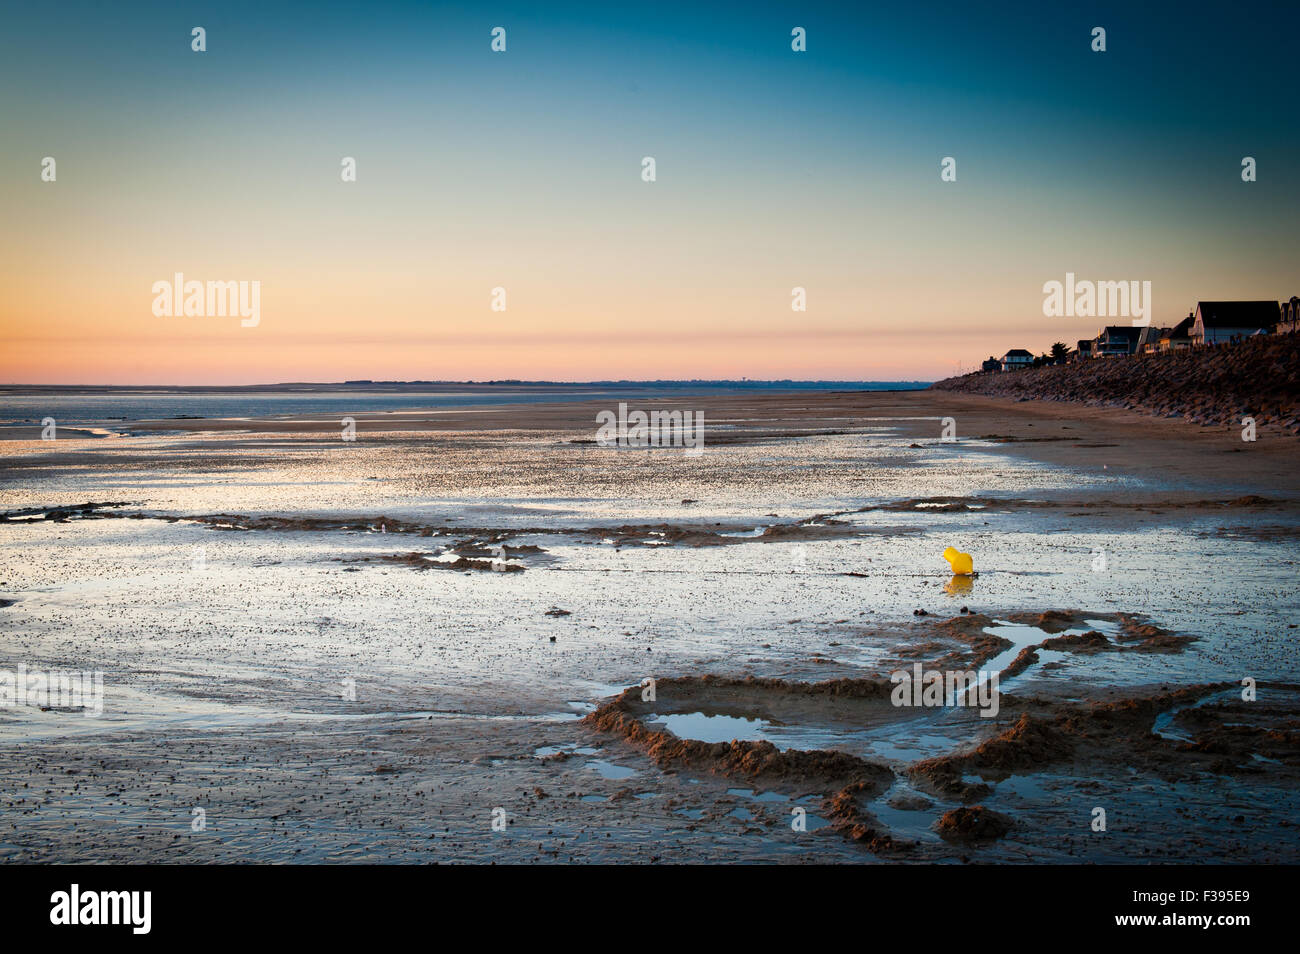 Scenic sunset landscape on a Normandy beach during low tide Stock Photo